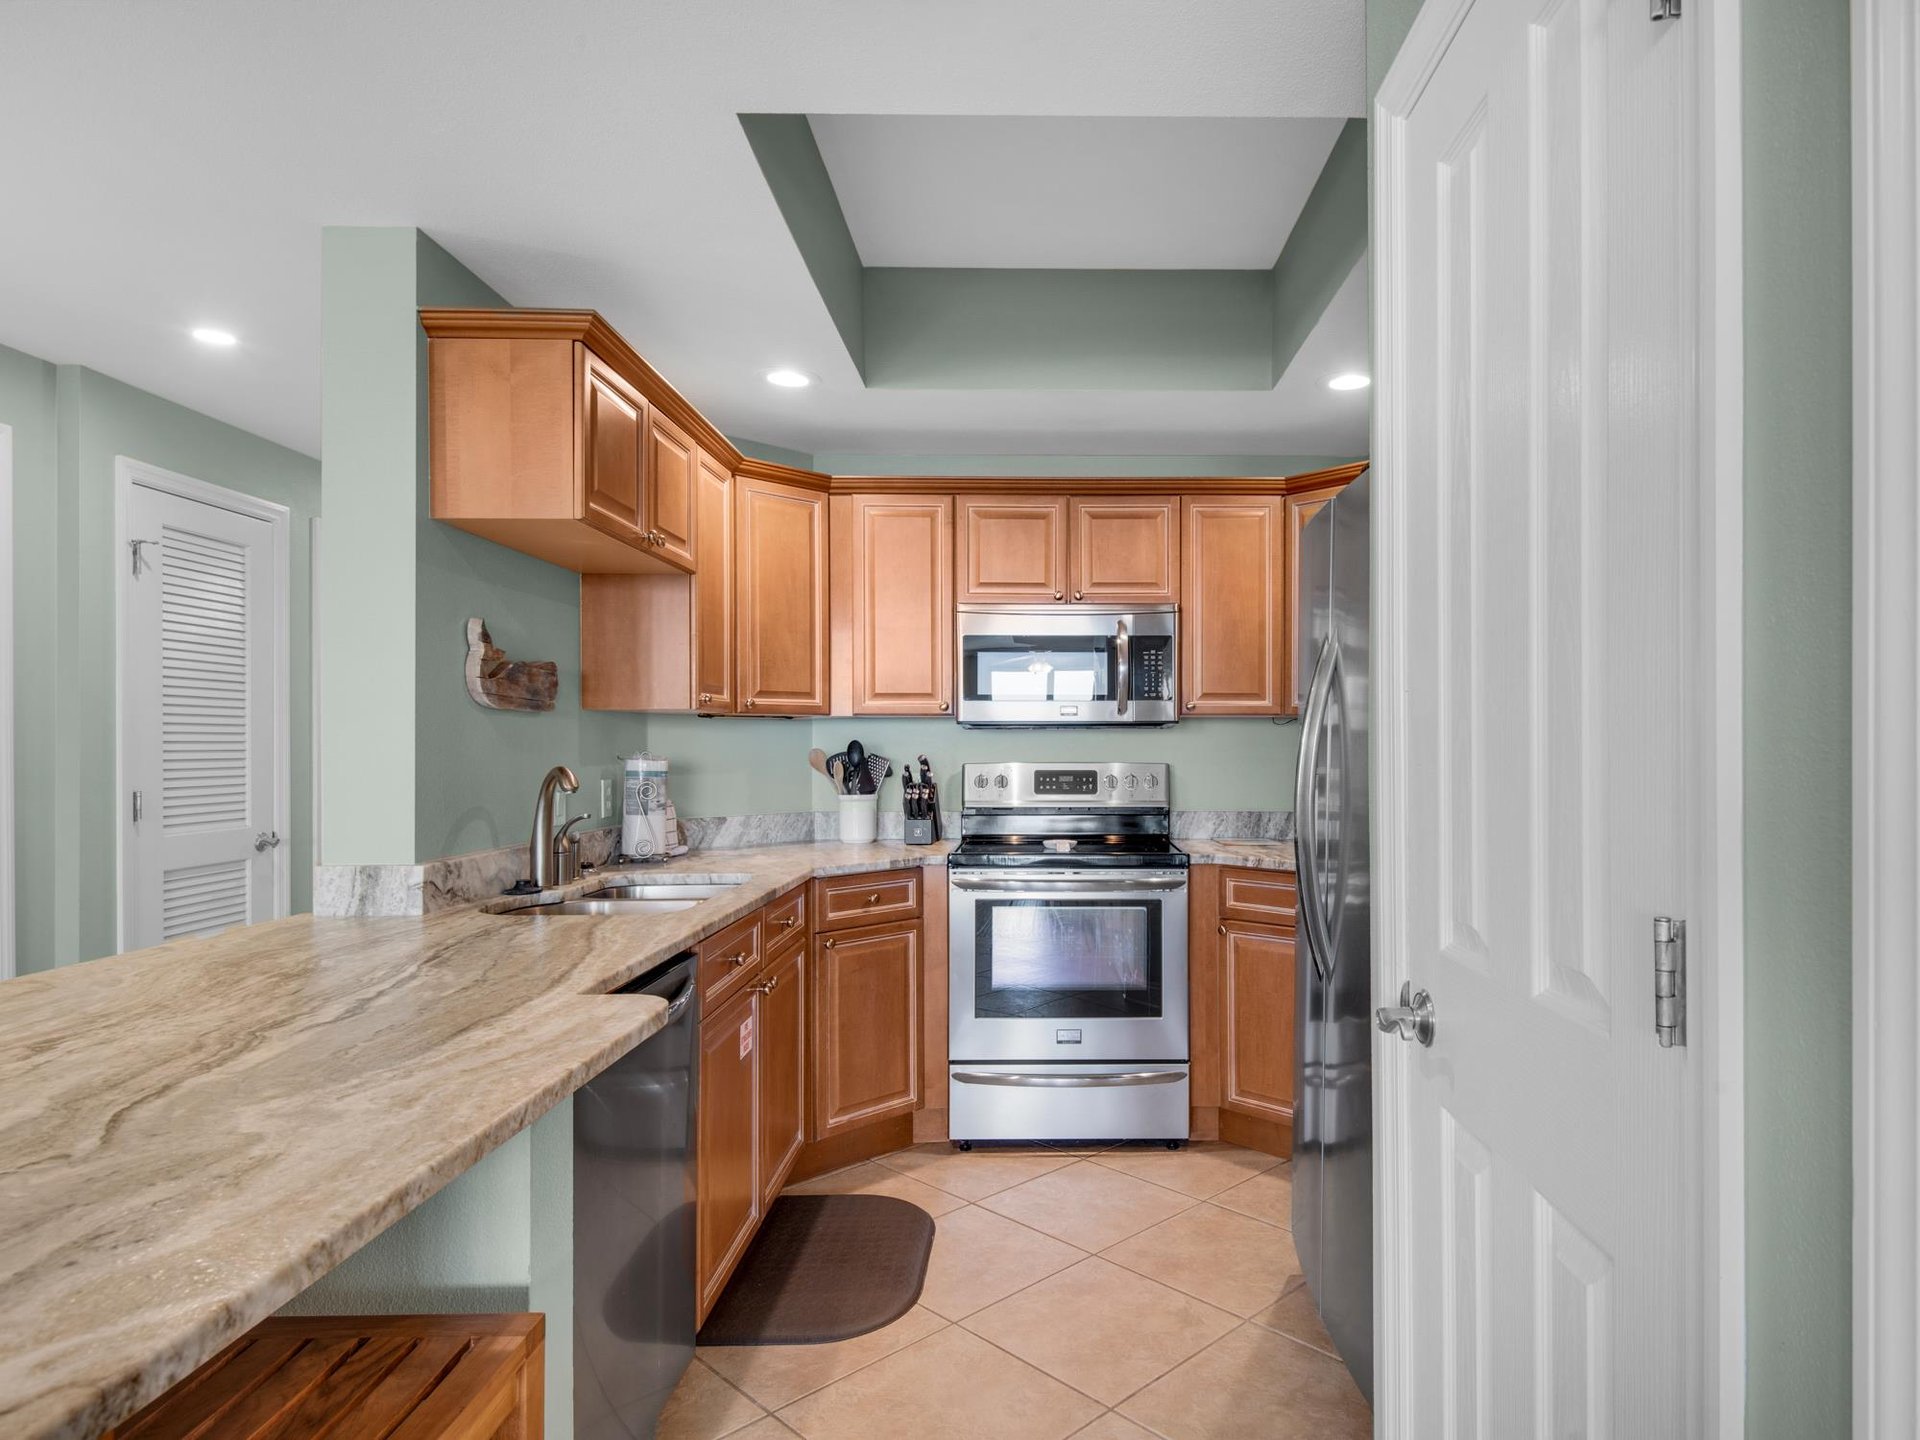 Spacious Kitchen with Stainless Steel Appliances